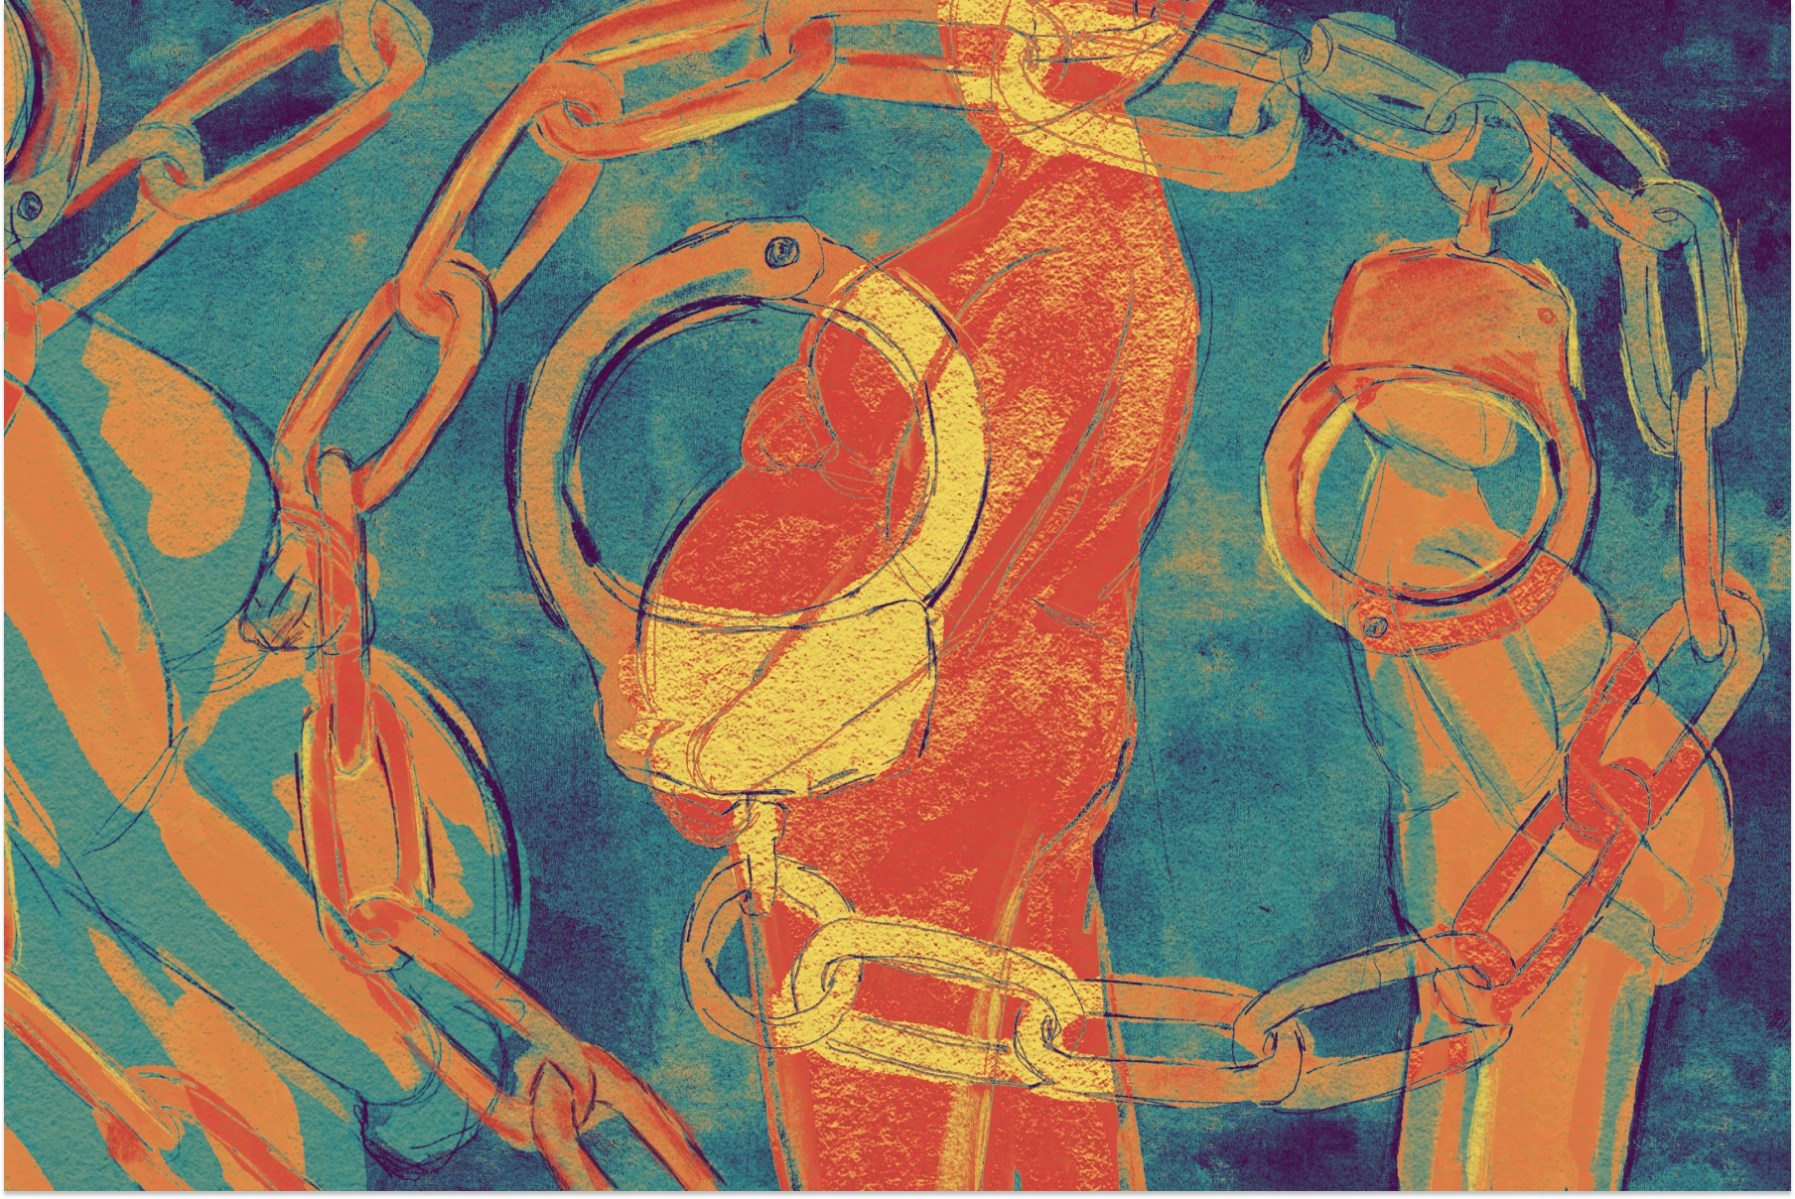 A digital illustration in colorful gouache shows a small crowd of abstract pregnant figures. A large pencil drawing of handcuffs on a chain is overlaid on the canvas in the shape of a spiral. It obscures the faces of the people.